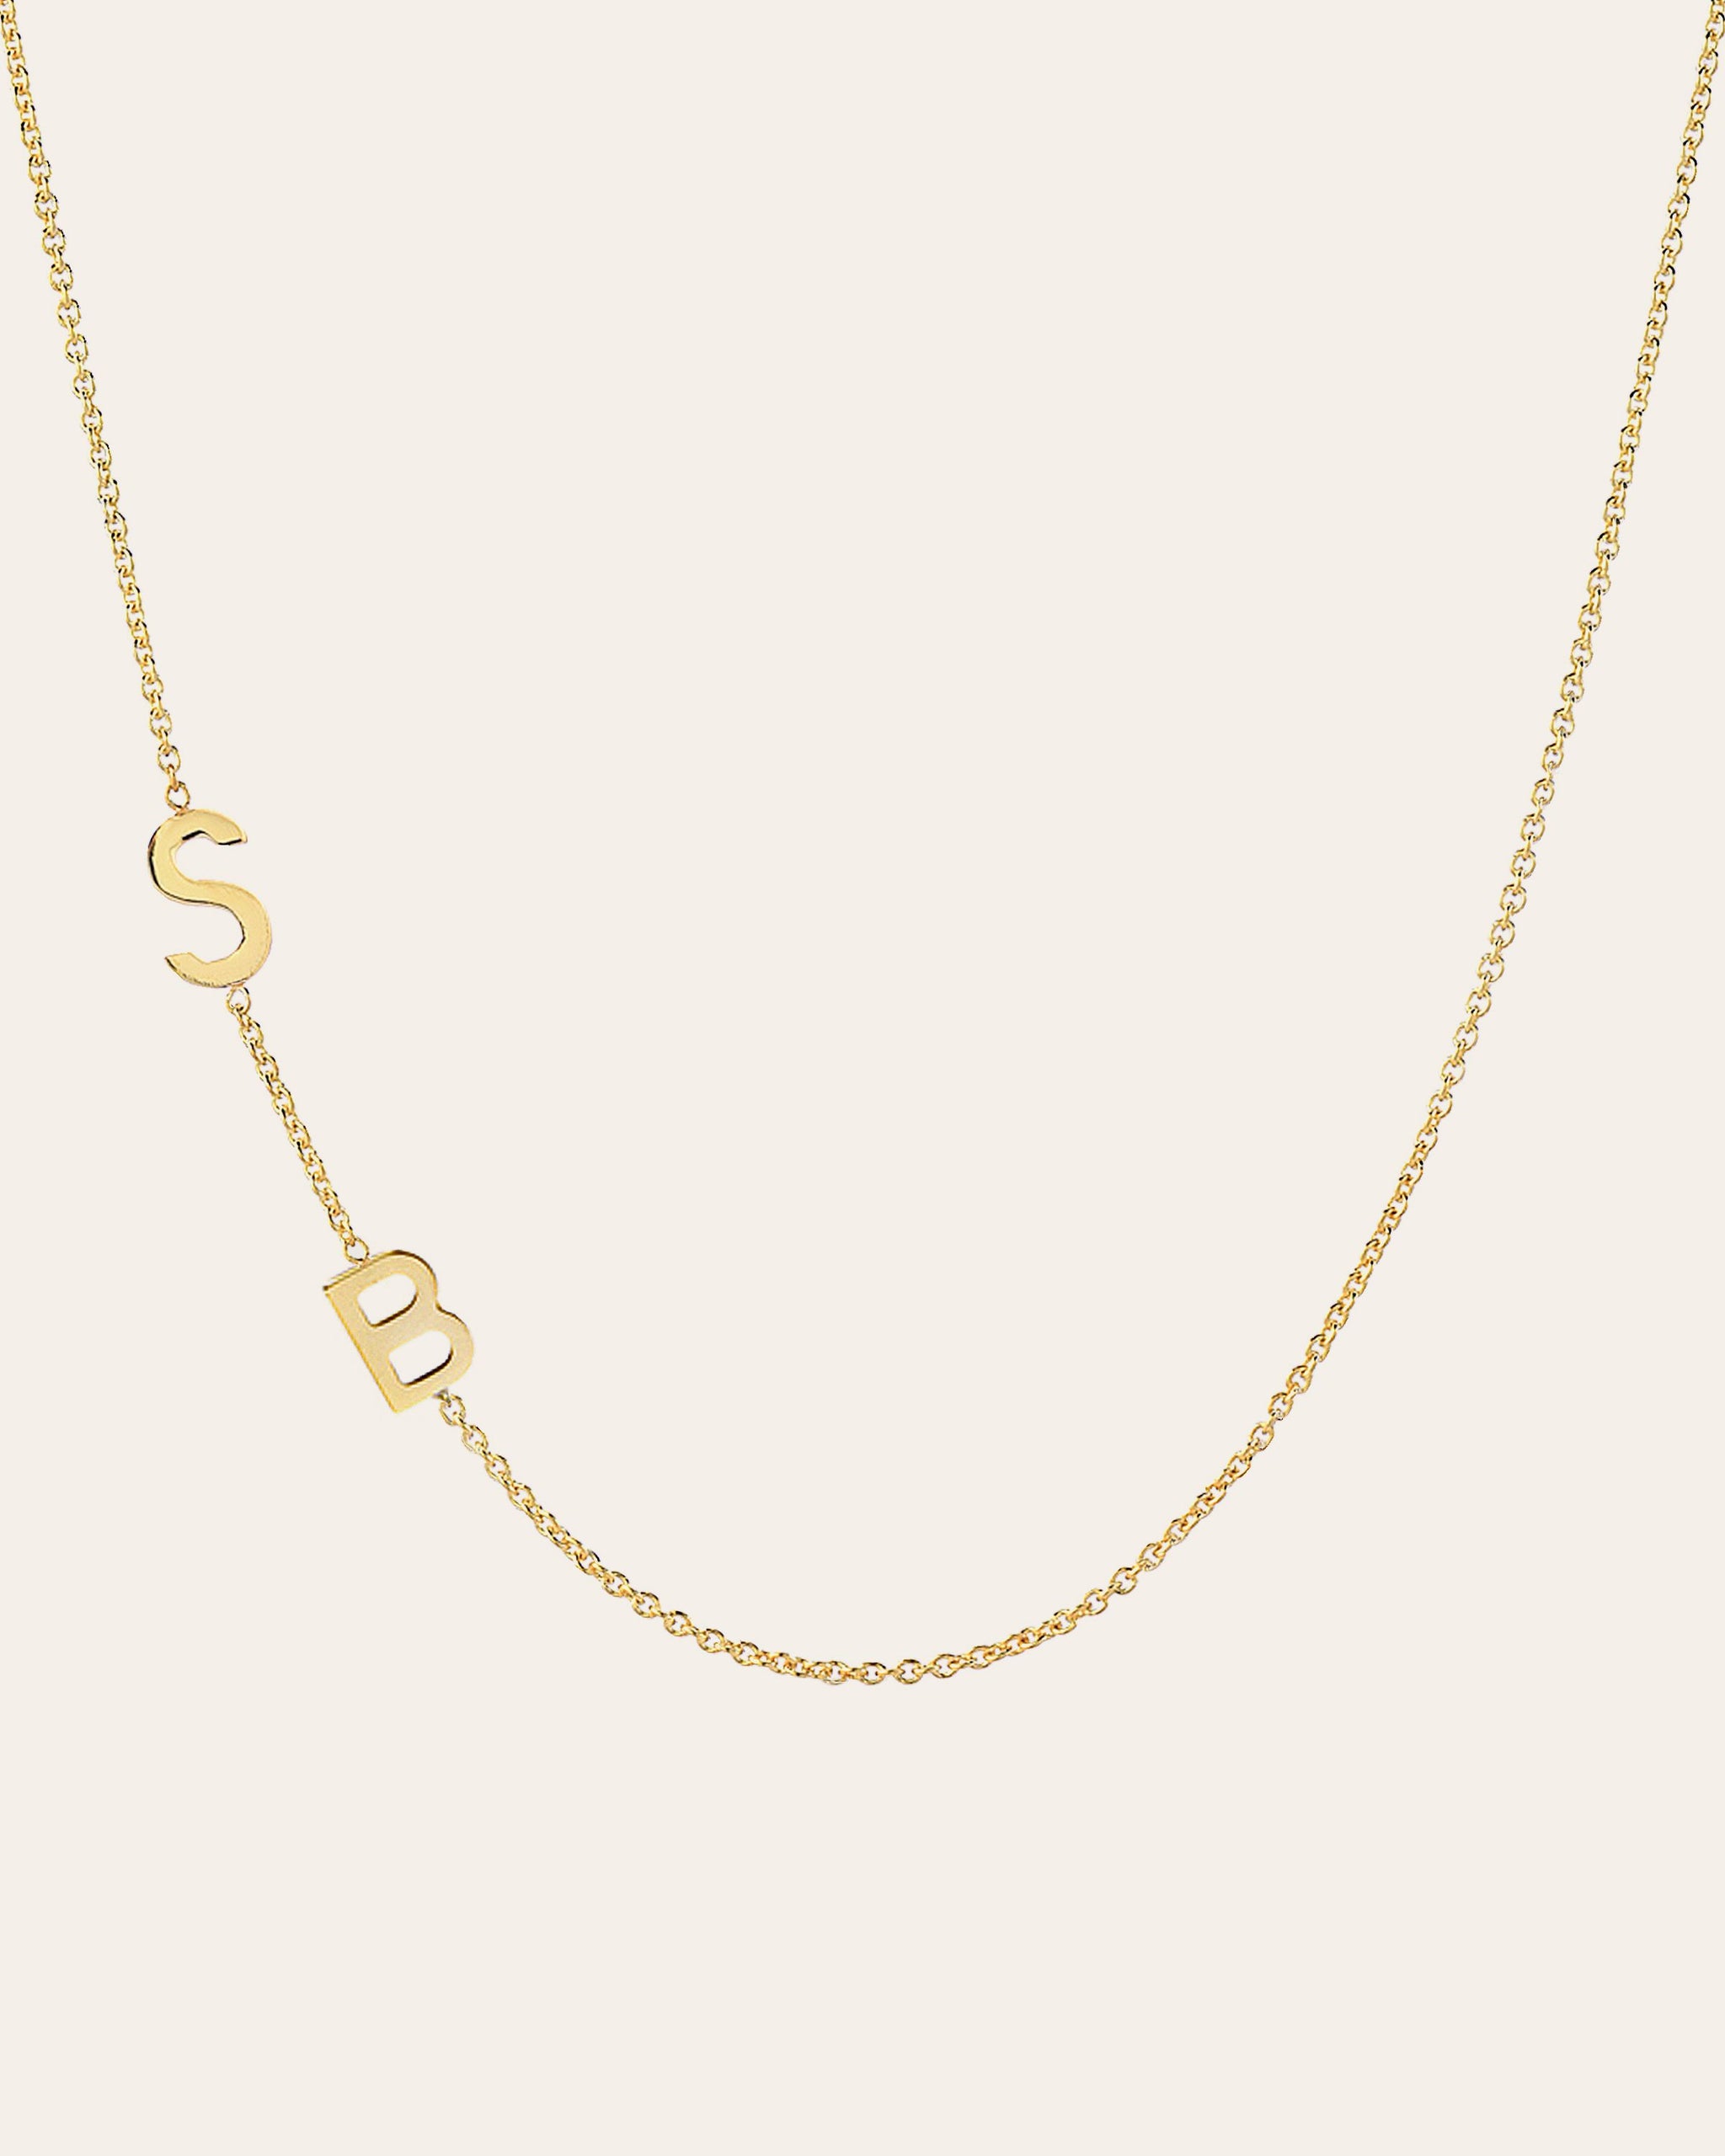 14K Gold Asymmetrical Multiple initials Necklace 18 + / 4 / Yes +